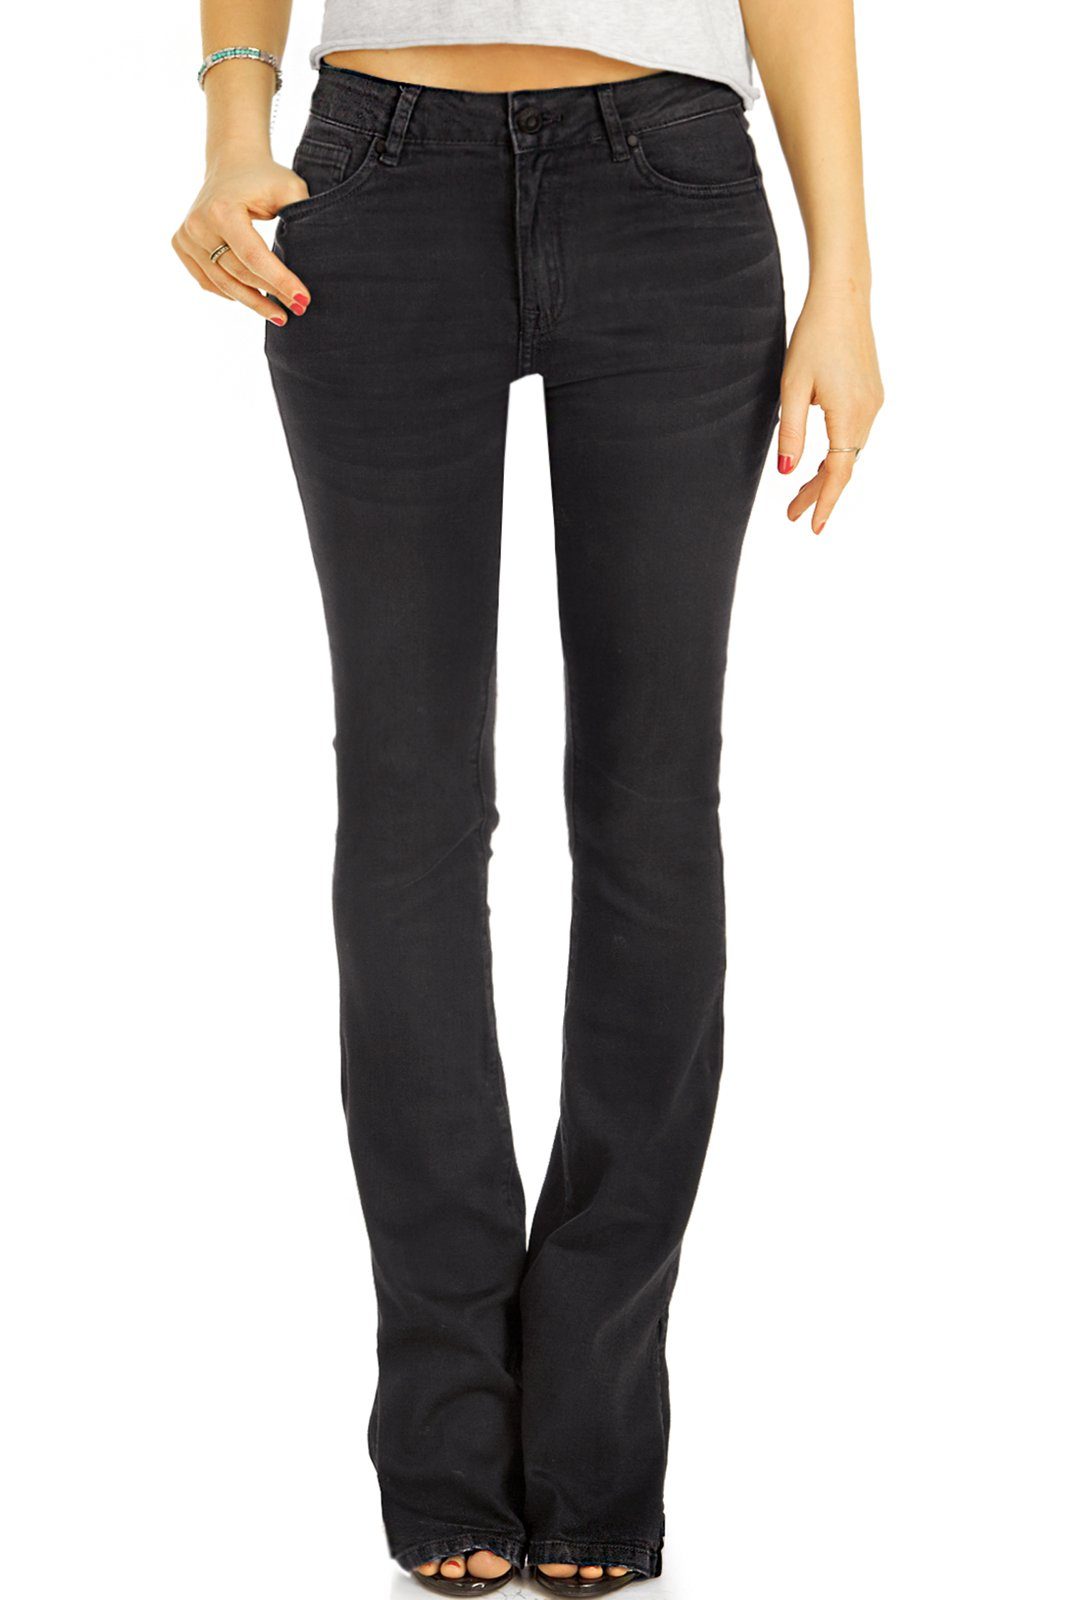 be styled Bootcut-Jeans Bootcut Jeans mid waist mit cut out Hose - Damen - j27r mit Stretch-Anteil, 5-Pocket-Style